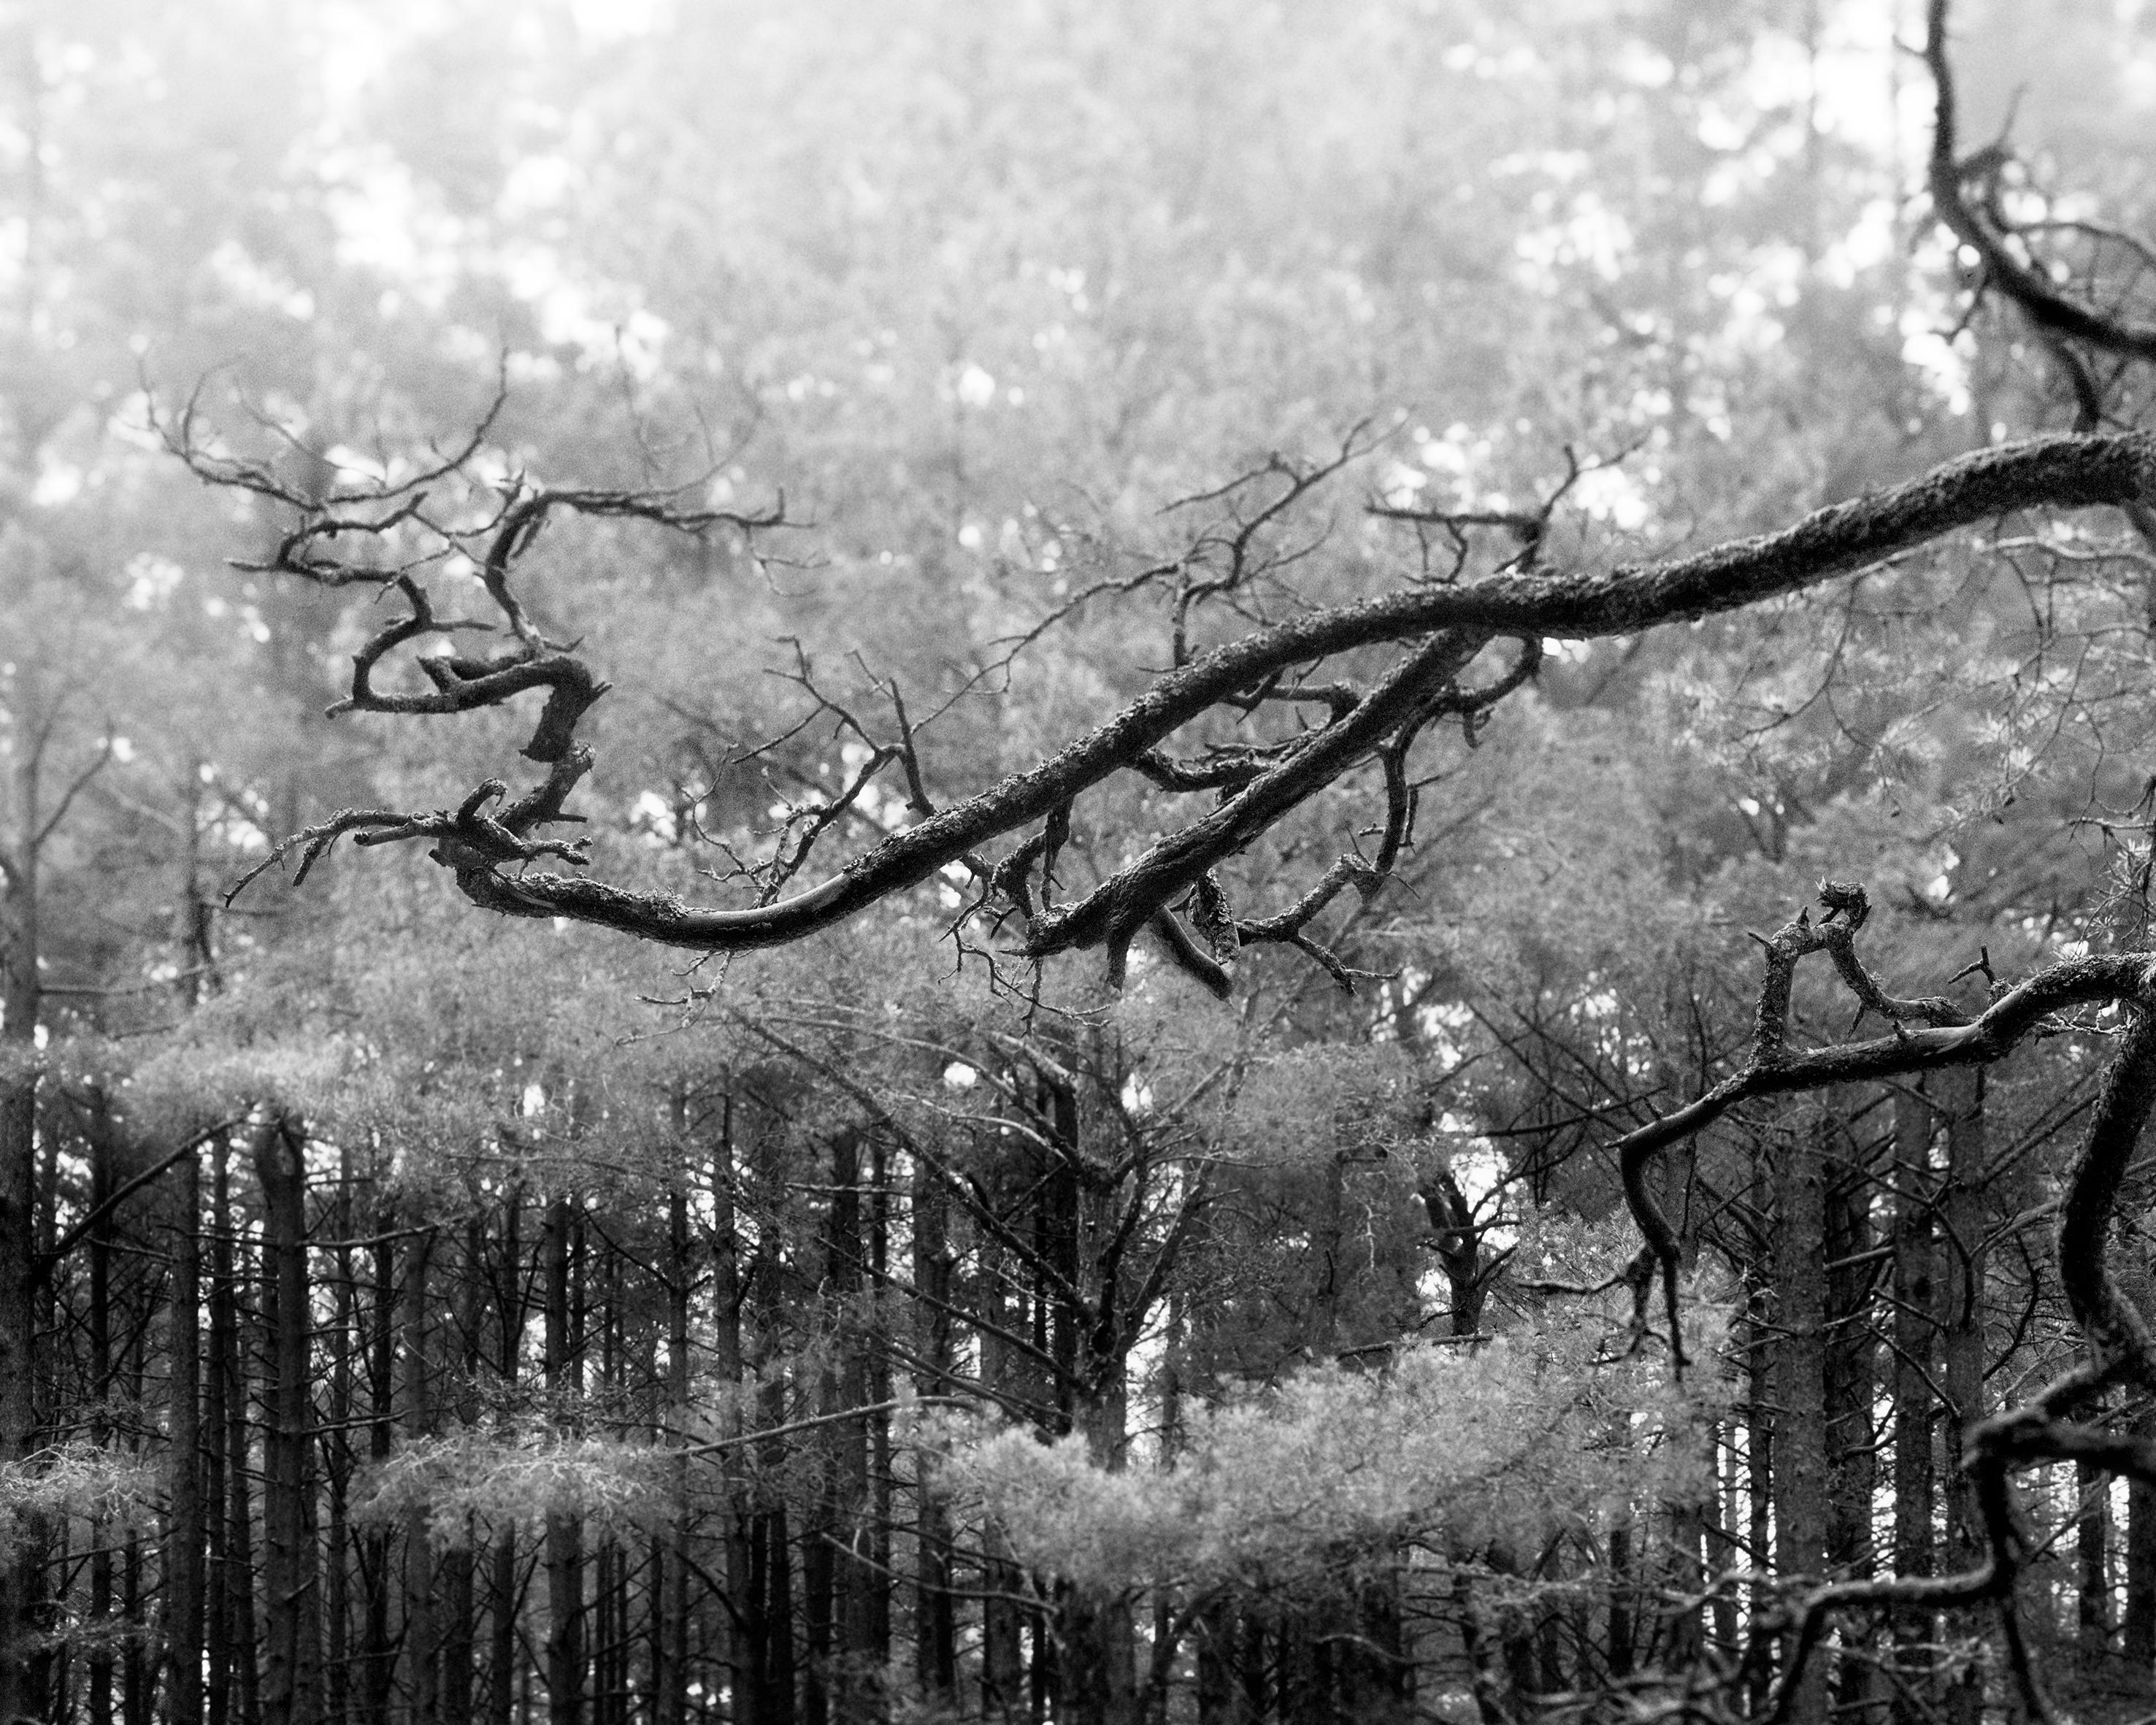 Baltic pine - analogue black and white forest photography, Limited edition of 20